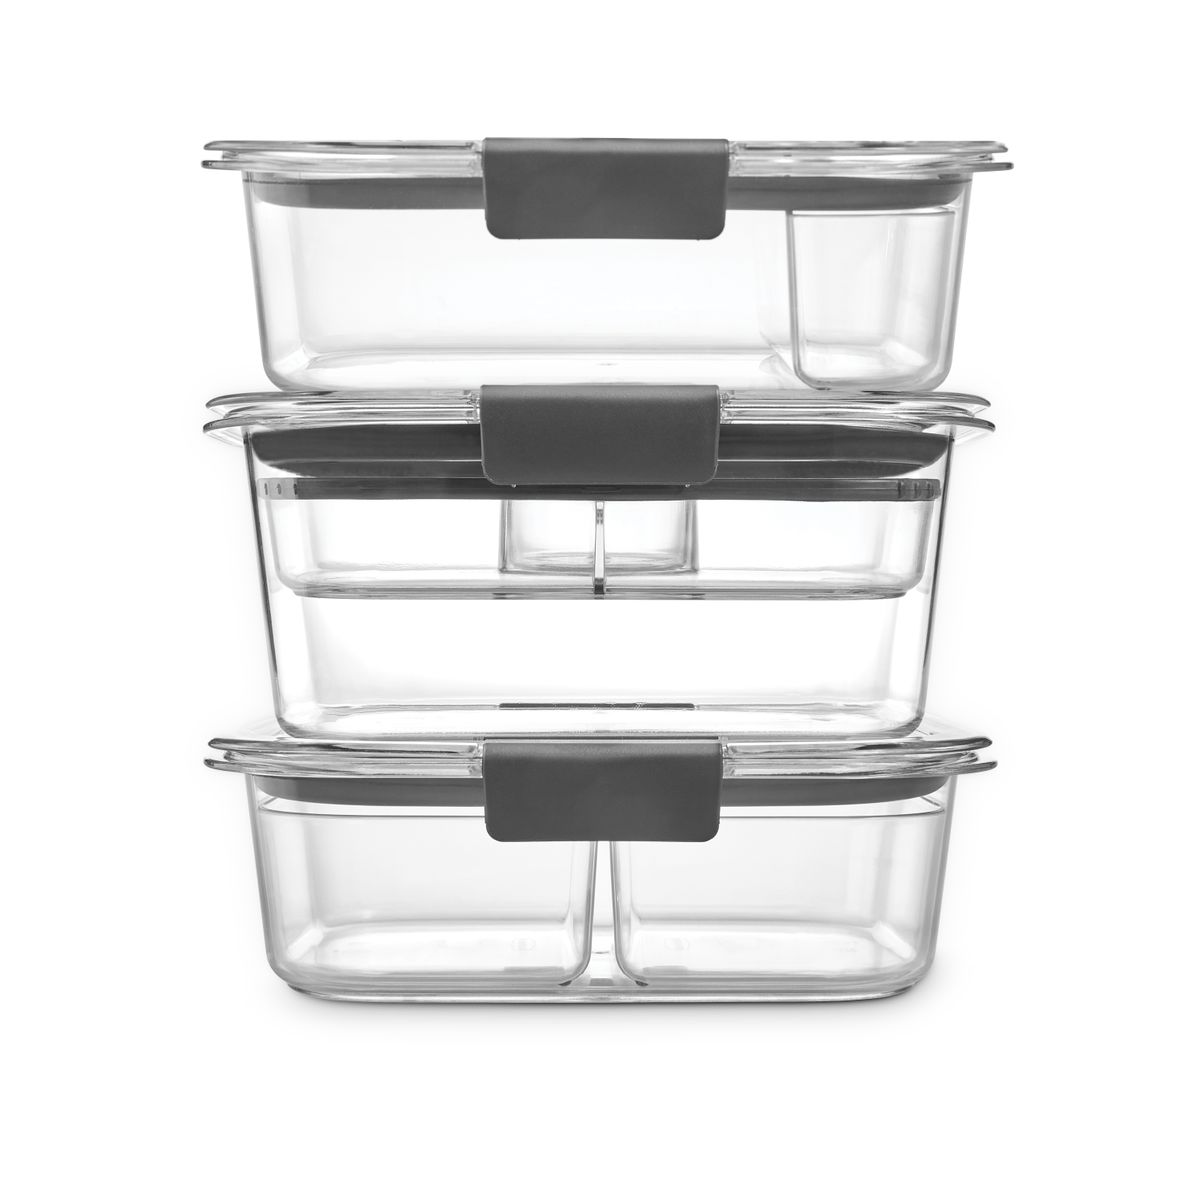 RDY 送料無料 Rubbermaid Brilliance Food Storage Containers, 12 Piece Sandwich and Salad Lunch Kit, Leak-Proof, BPA Free, Clear Tritan Plastic. 楽天海外通販 Rubbermaid Brilliance Food Storage Containers, 12 Piece Sandwich and Salad Lunch